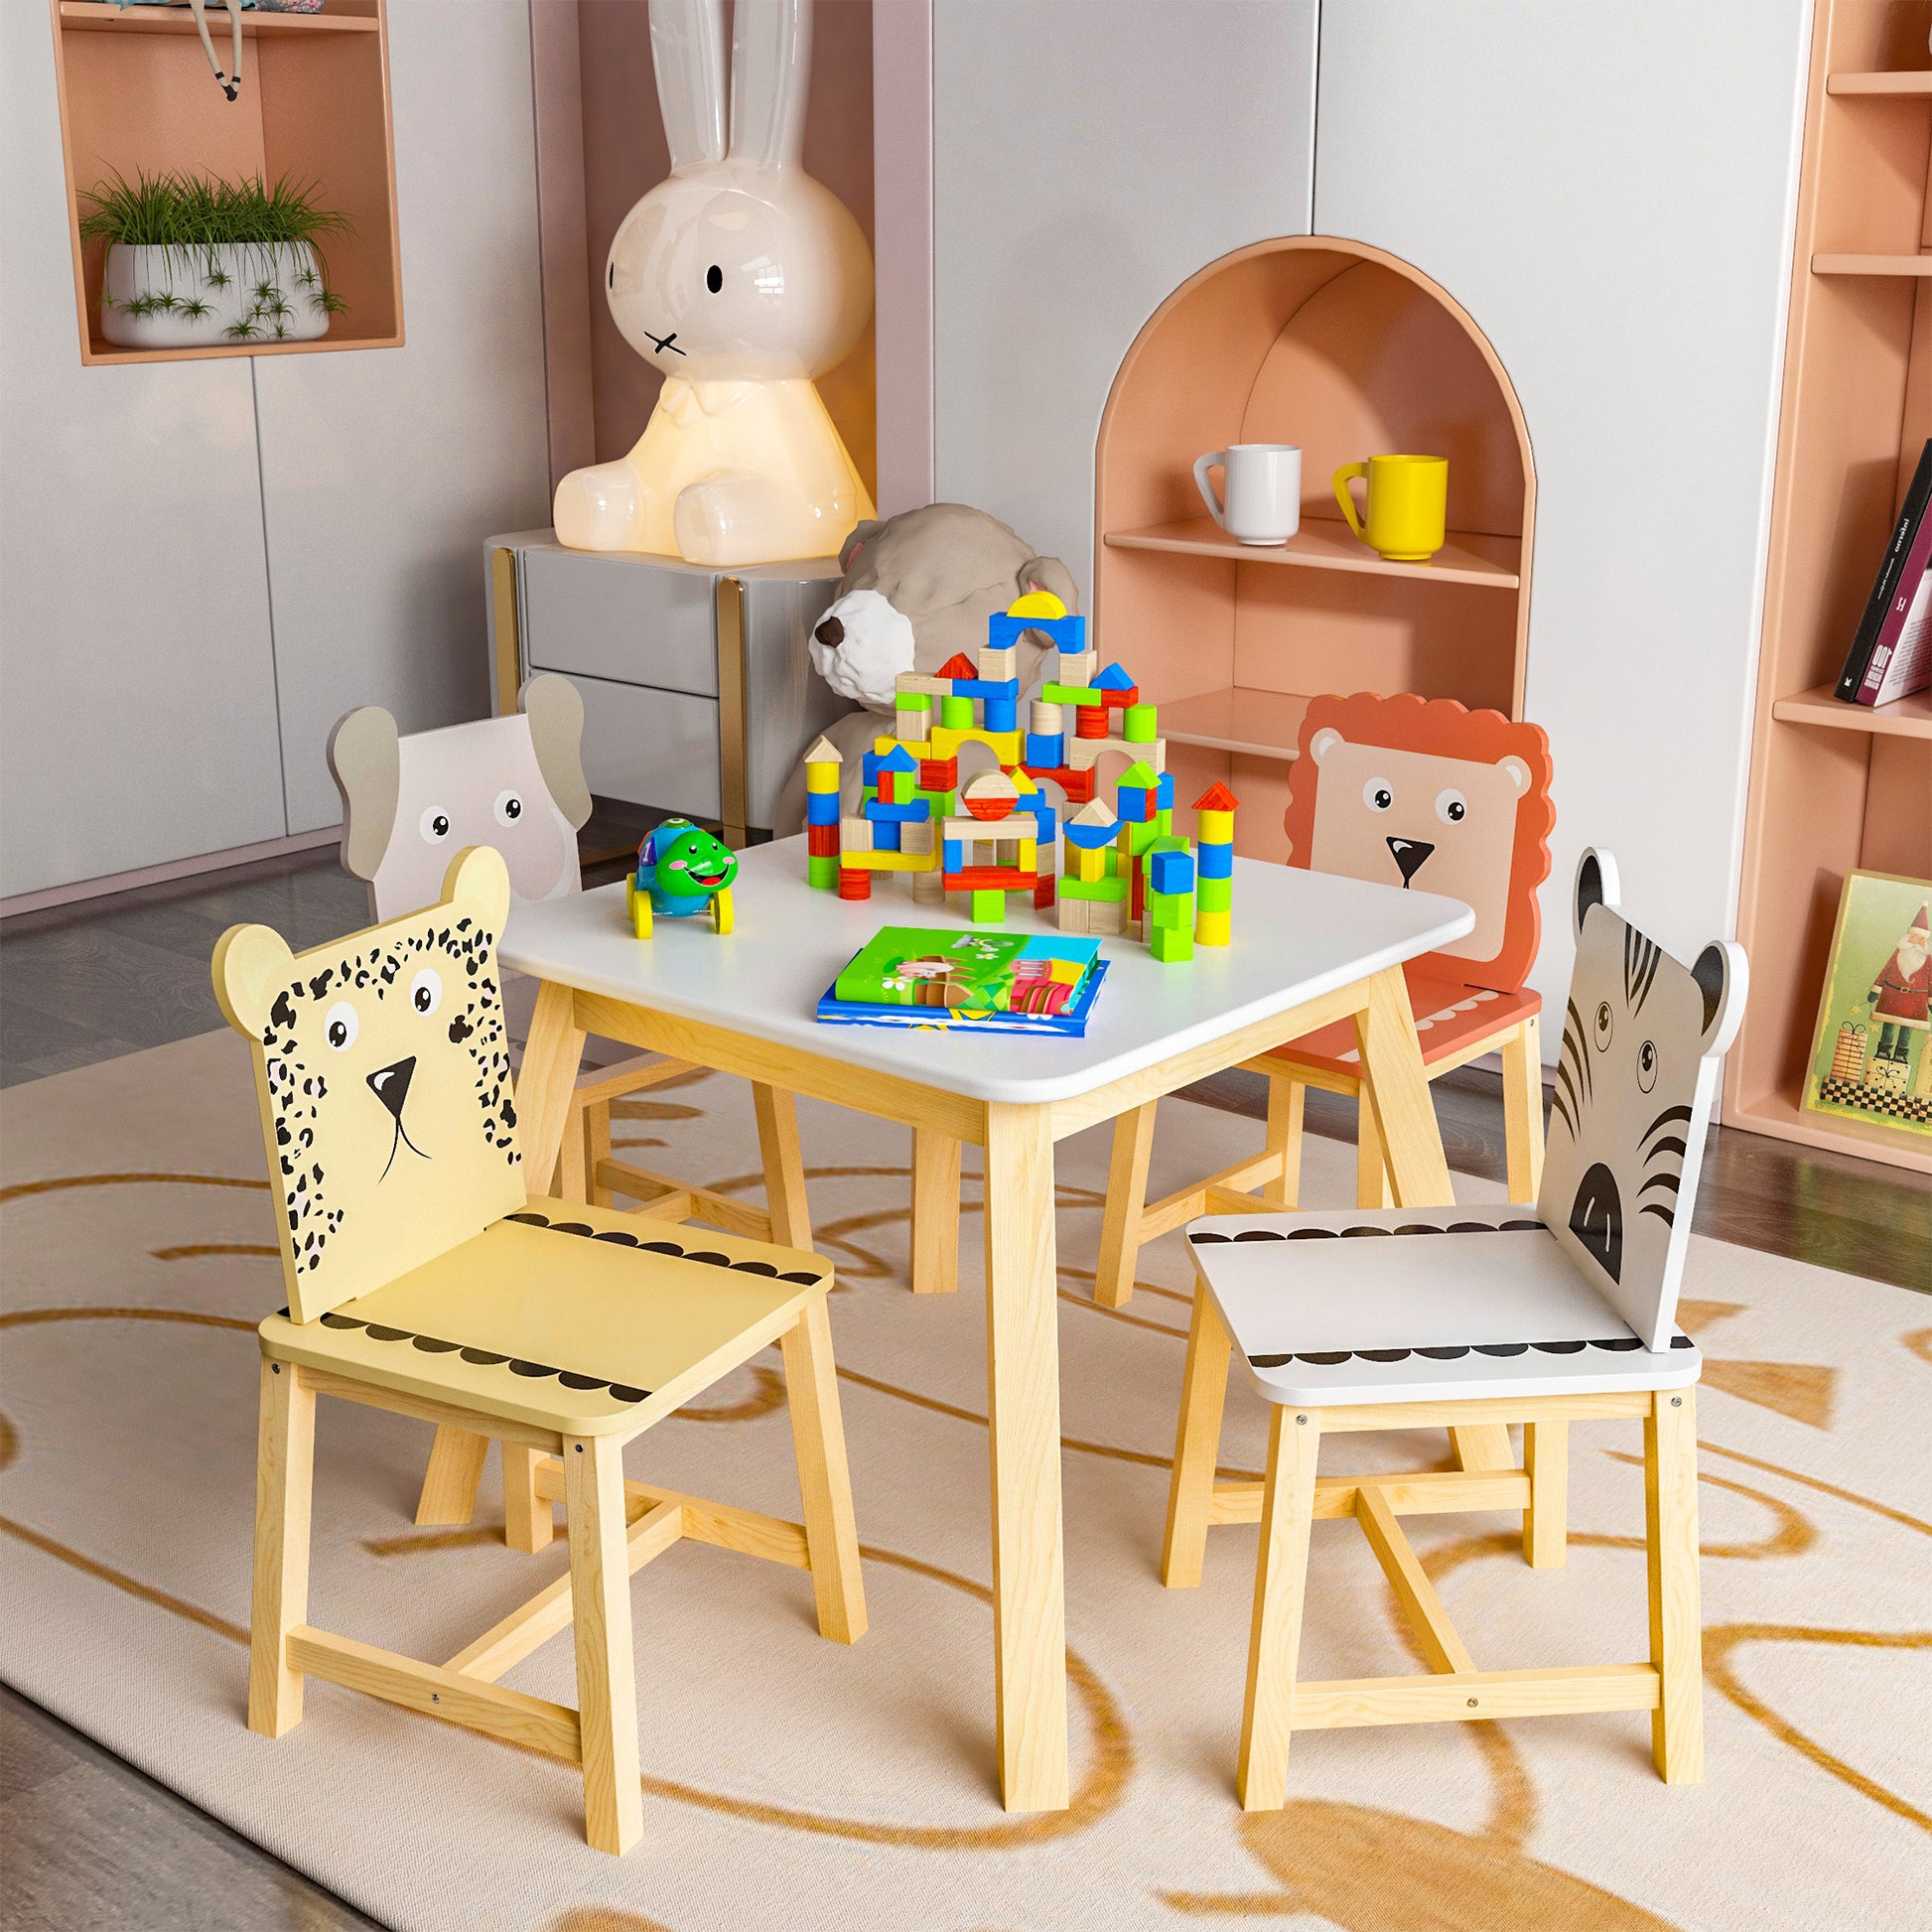 Moonriver Kids Wood Table with 4 Chairs Set Cartoon Animals